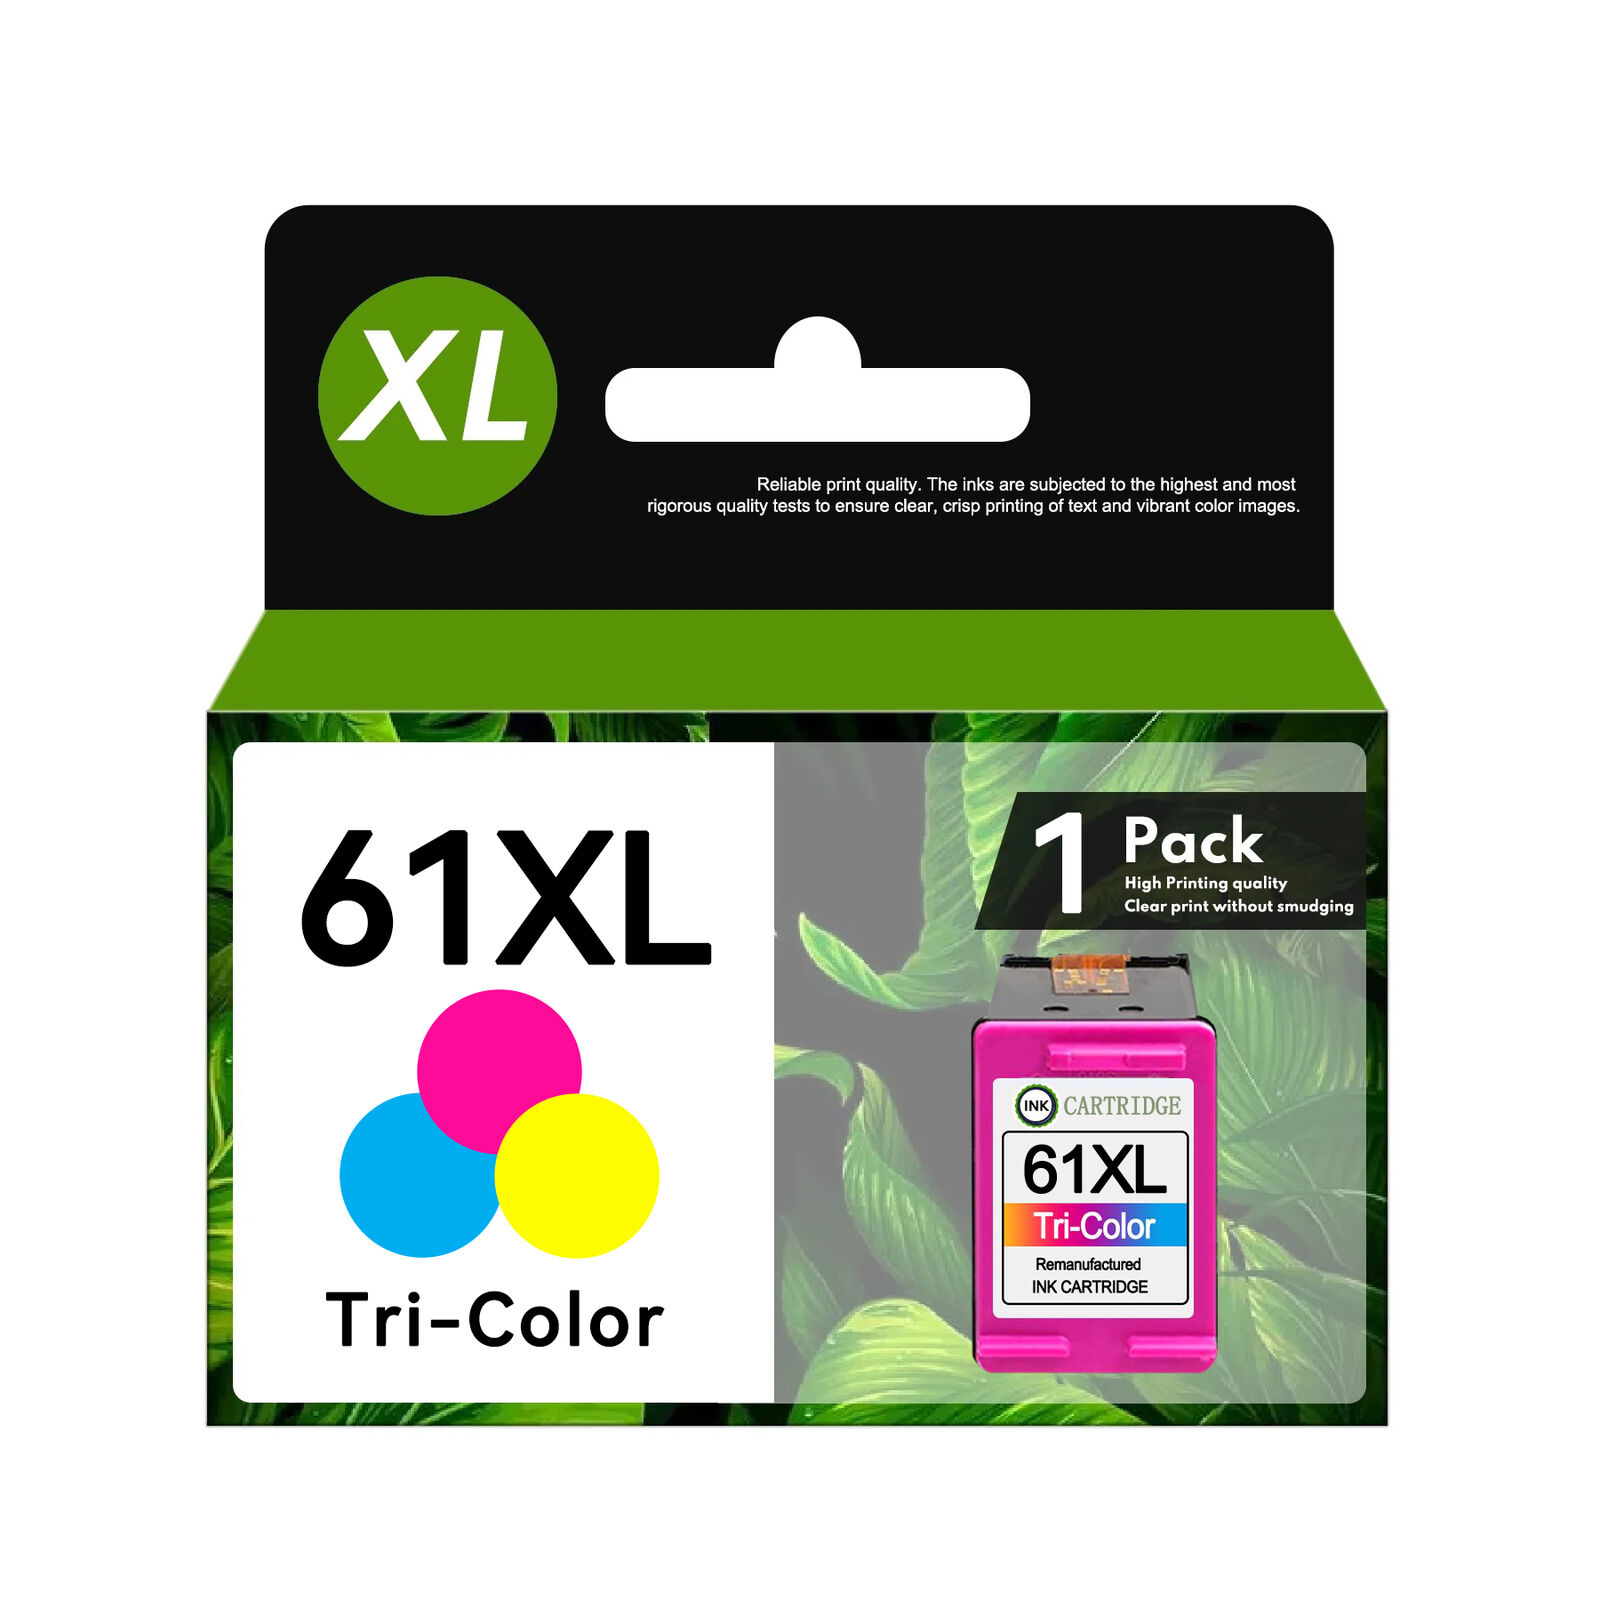 61XL Ink Cartridge replacement for HP 61XL ENVY 4502 4504 4500 4501 Printer Lot